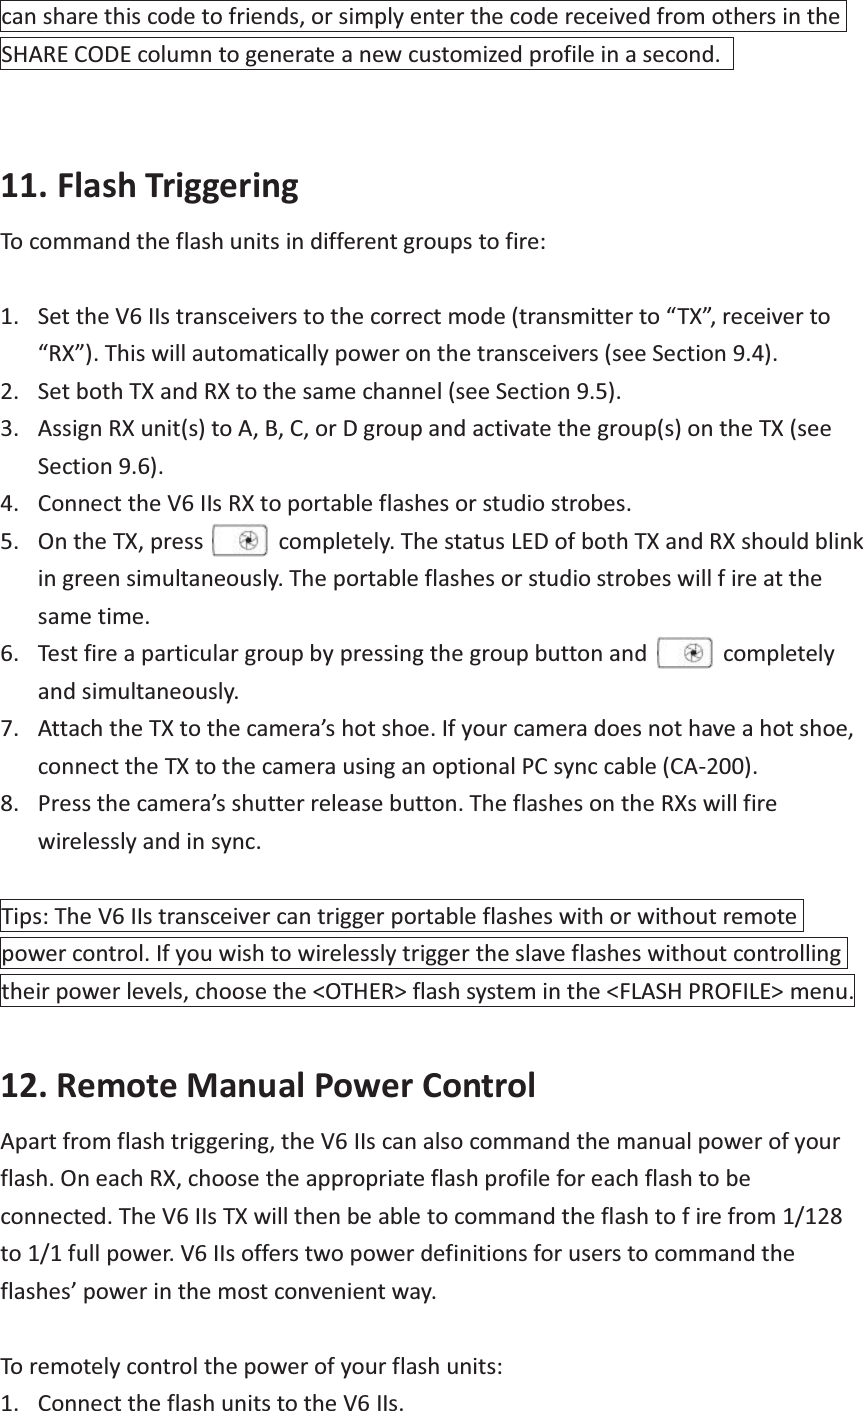 can share this code to friends, or simply enter the code received from others in the SHARE CODE column to generate a new customized profile in a second.     11. Flash Triggering To command the flash units in different groups to fire:  1. Set the V6 IIs transceivers to the correct mode (transmitter to “TX”, receiver to “RX”). This will automatically power on the transceivers (see Section 9.4). 2. Set both TX and RX to the same channel (see Section 9.5). 3. Assign RX unit(s) to A, B, C, or D group and activate the group(s) on the TX (see Section 9.6). 4. Connect the V6 IIs RX to portable flashes or studio strobes. 5. On the TX, press      completely. The status LED of both TX and RX should blink in green simultaneously. The portable flashes or studio strobes will f ire at the same time. 6. Test fire a particular group by pressing the group button and            completely and simultaneously. 7. Attach the TX to the camera’s hot shoe. If your camera does not have a hot shoe, connect the TX to the camera using an optional PC sync cable (CA-200). 8. Press the camera’s shutter release button. The flashes on the RXs will fire wirelessly and in sync.  Tips: The V6 IIs transceiver can trigger portable flashes with or without remote power control. If you wish to wirelessly trigger the slave flashes without controlling their power levels, choose the &lt;OTHER&gt; flash system in the &lt;FLASH PROFILE&gt; menu.  12. Remote Manual Power Control Apart from flash triggering, the V6 IIs can also command the manual power of your flash. On each RX, choose the appropriate flash profile for each flash to be connected. The V6 IIs TX will then be able to command the flash to f ire from 1/128 to 1/1 full power. V6 IIs offers two power definitions for users to command the flashes’ power in the most convenient way.  To remotely control the power of your flash units: 1. Connect the flash units to the V6 IIs. 